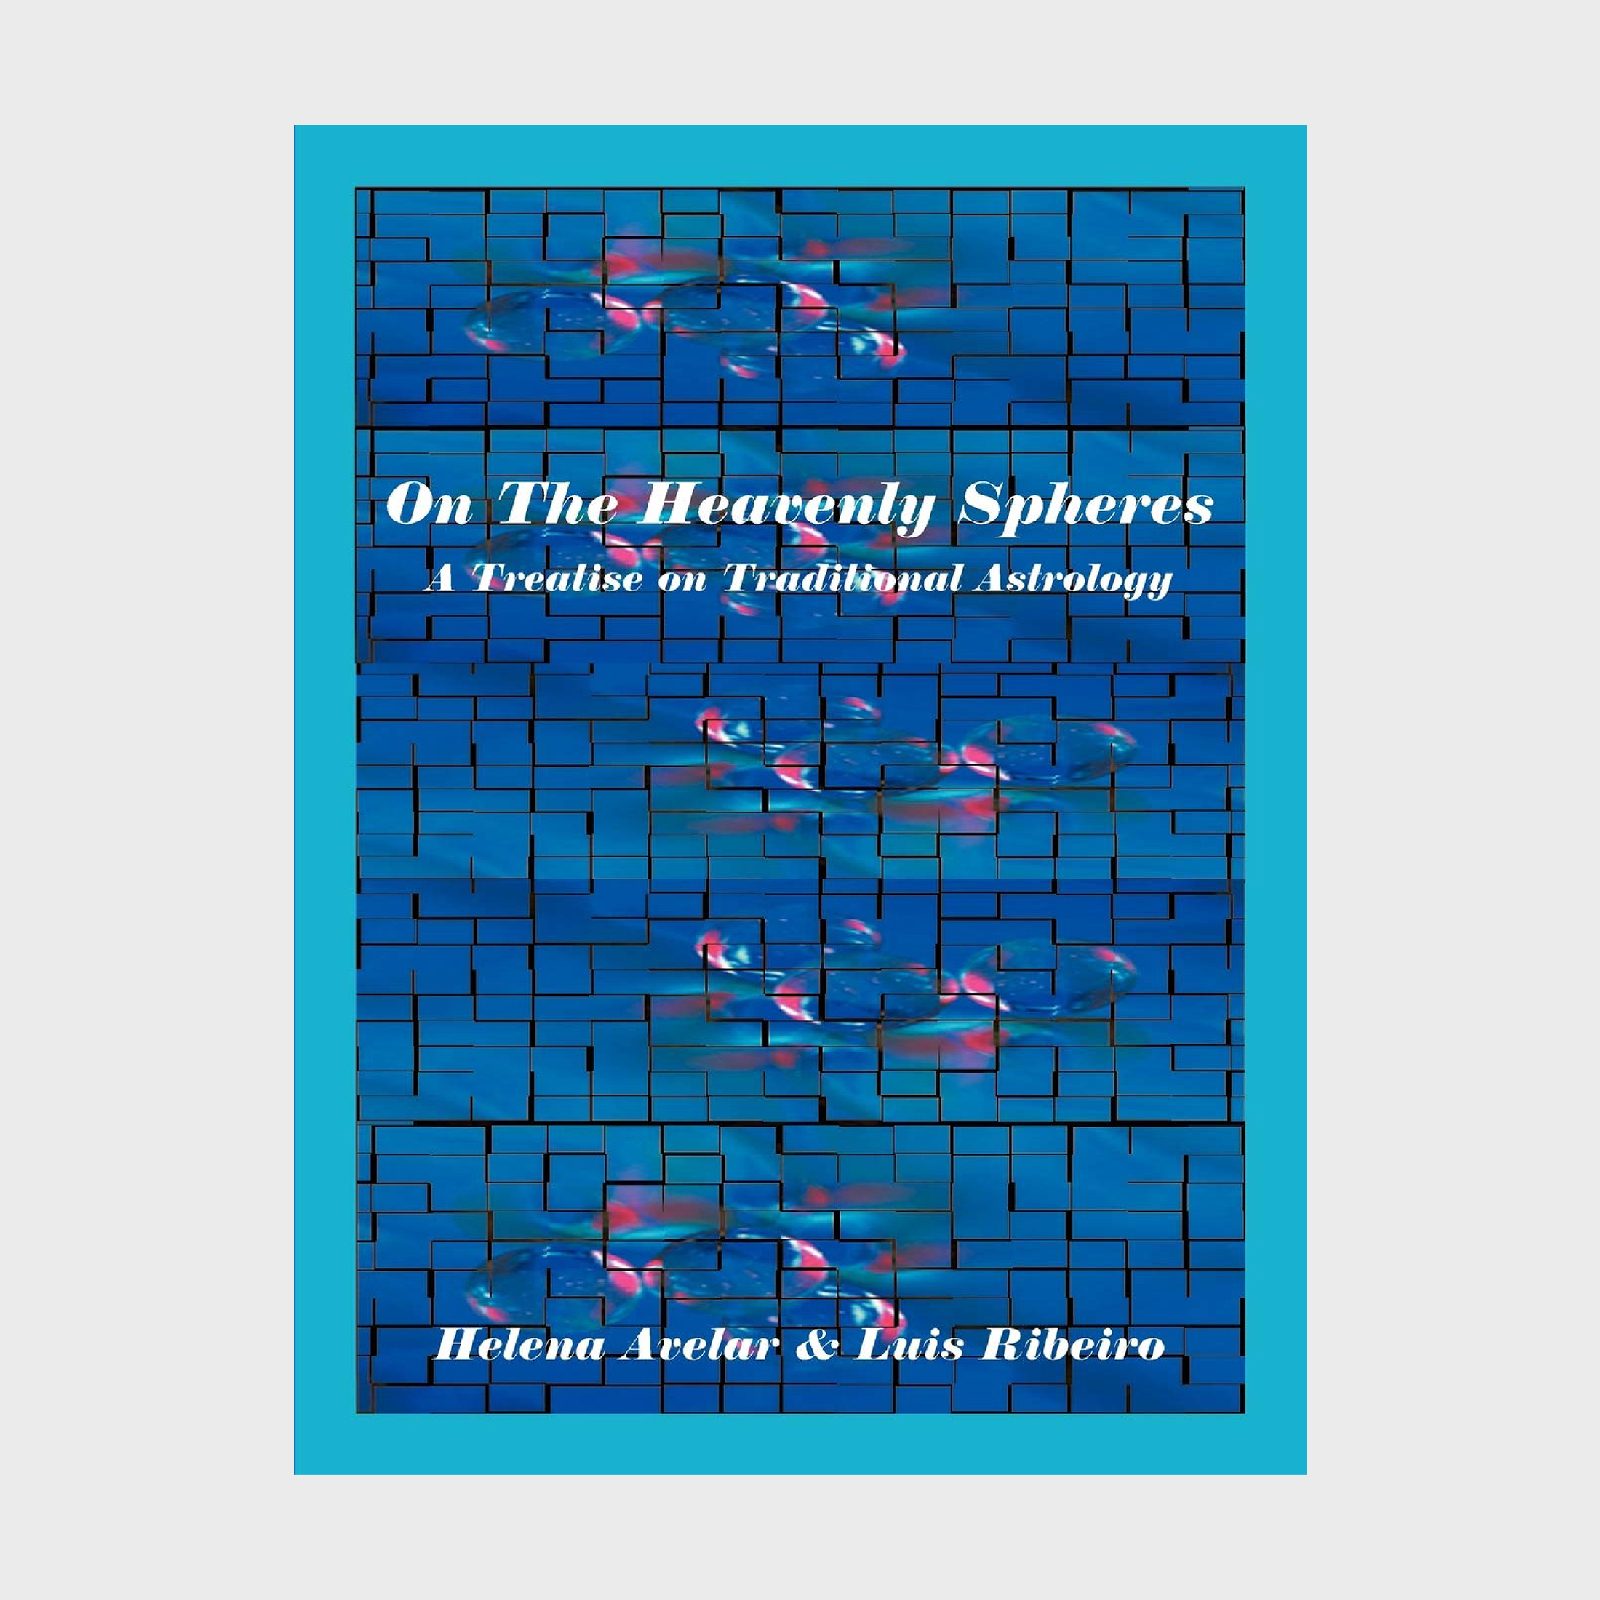 On The Heavenly Spheres A Treatise On Traditional Astrology By Helena Avelar And Luis Ribeiro Via Amazon